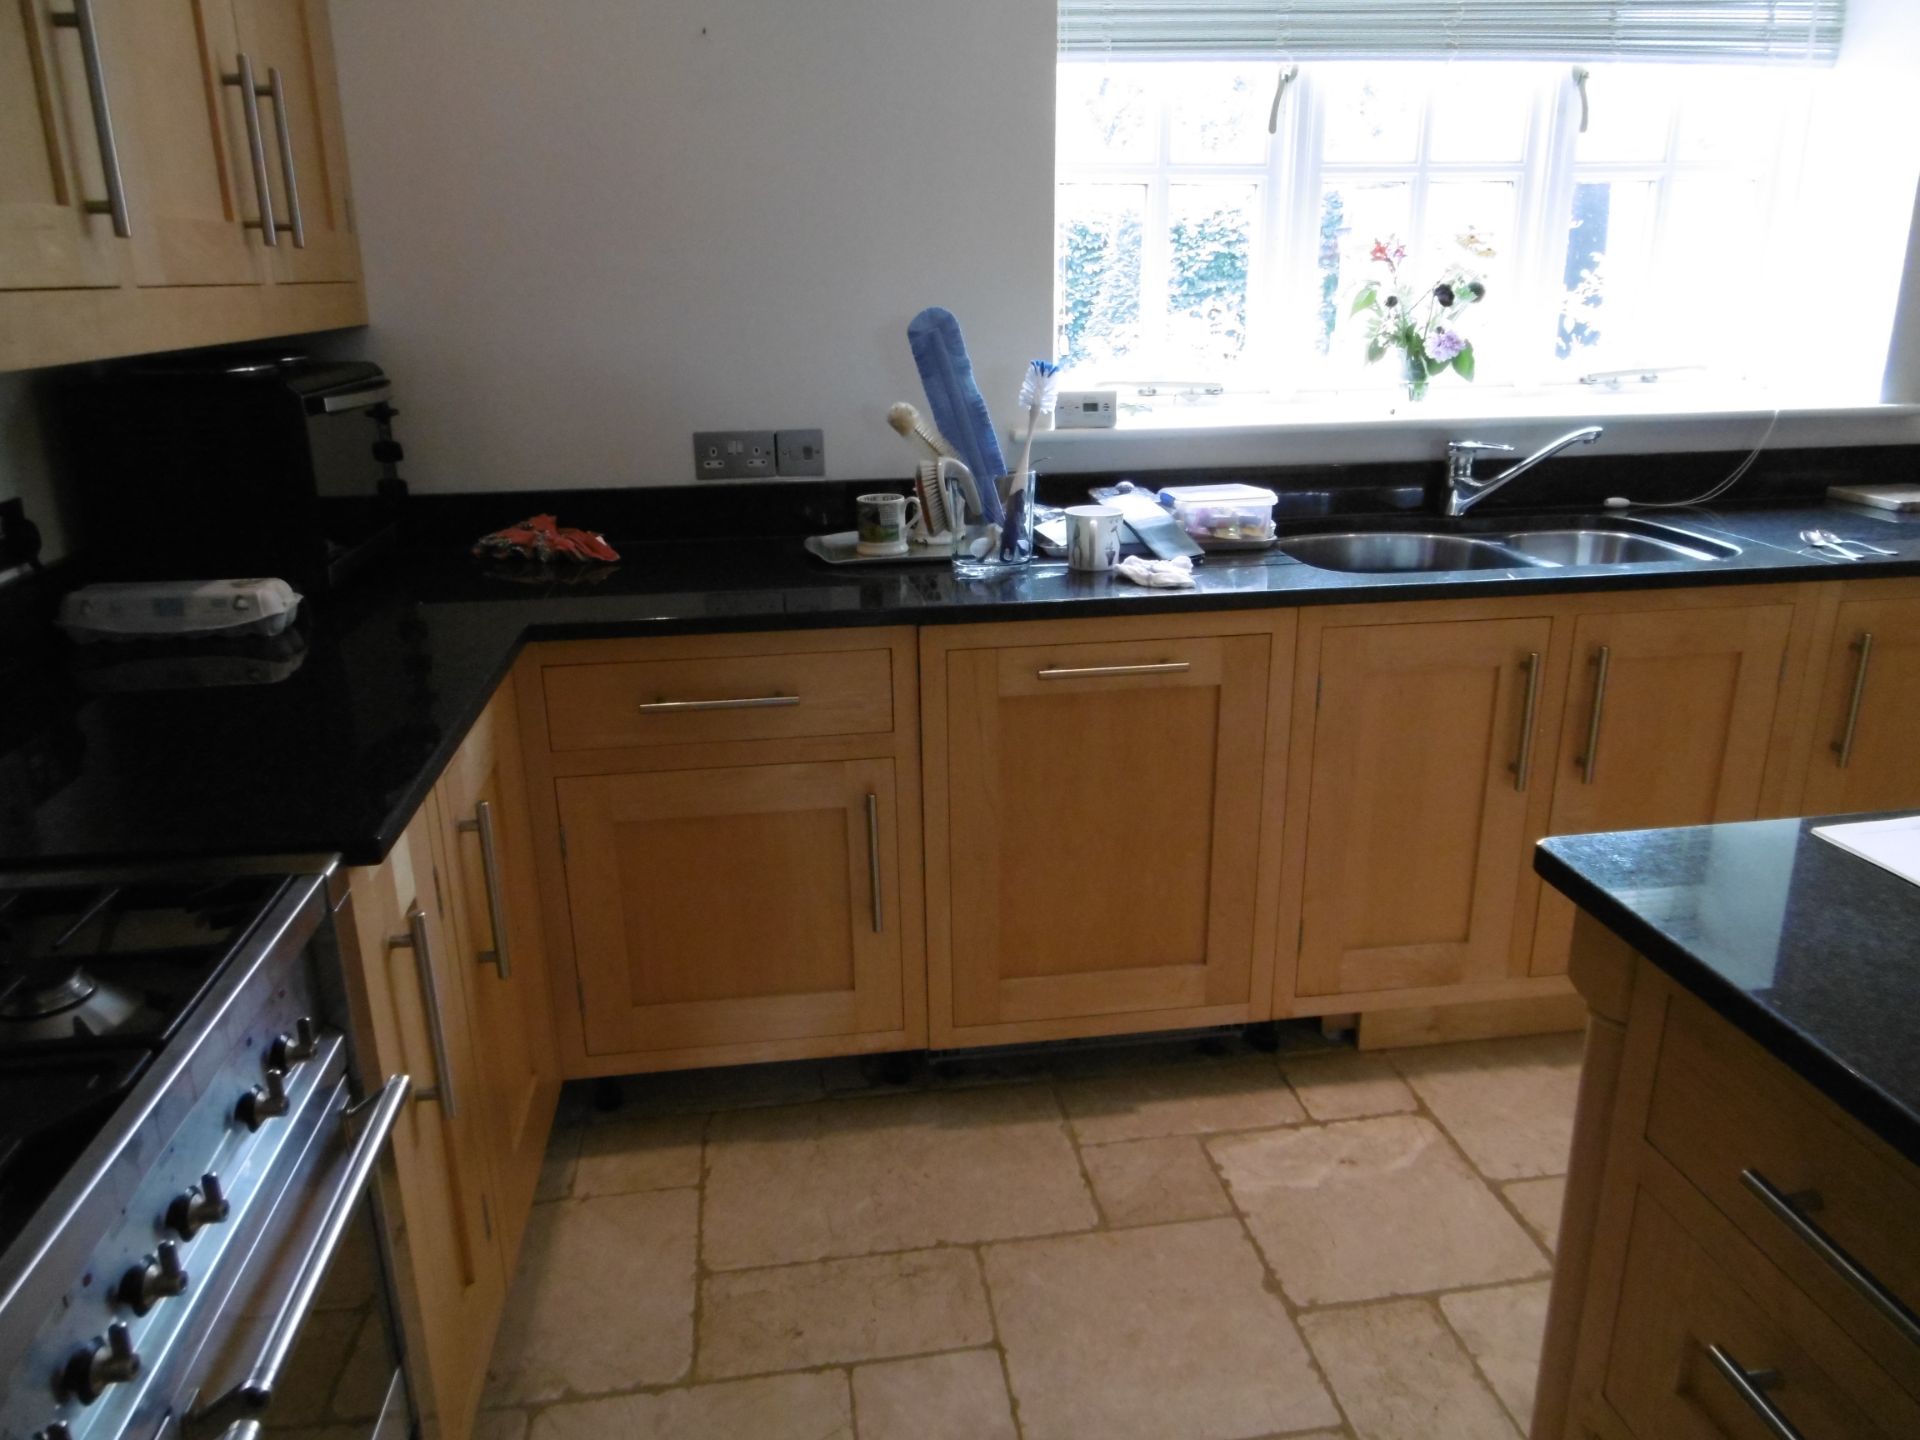 Luxury Used Maple Kitchen with Appliances including Range Cooker - Image 4 of 5